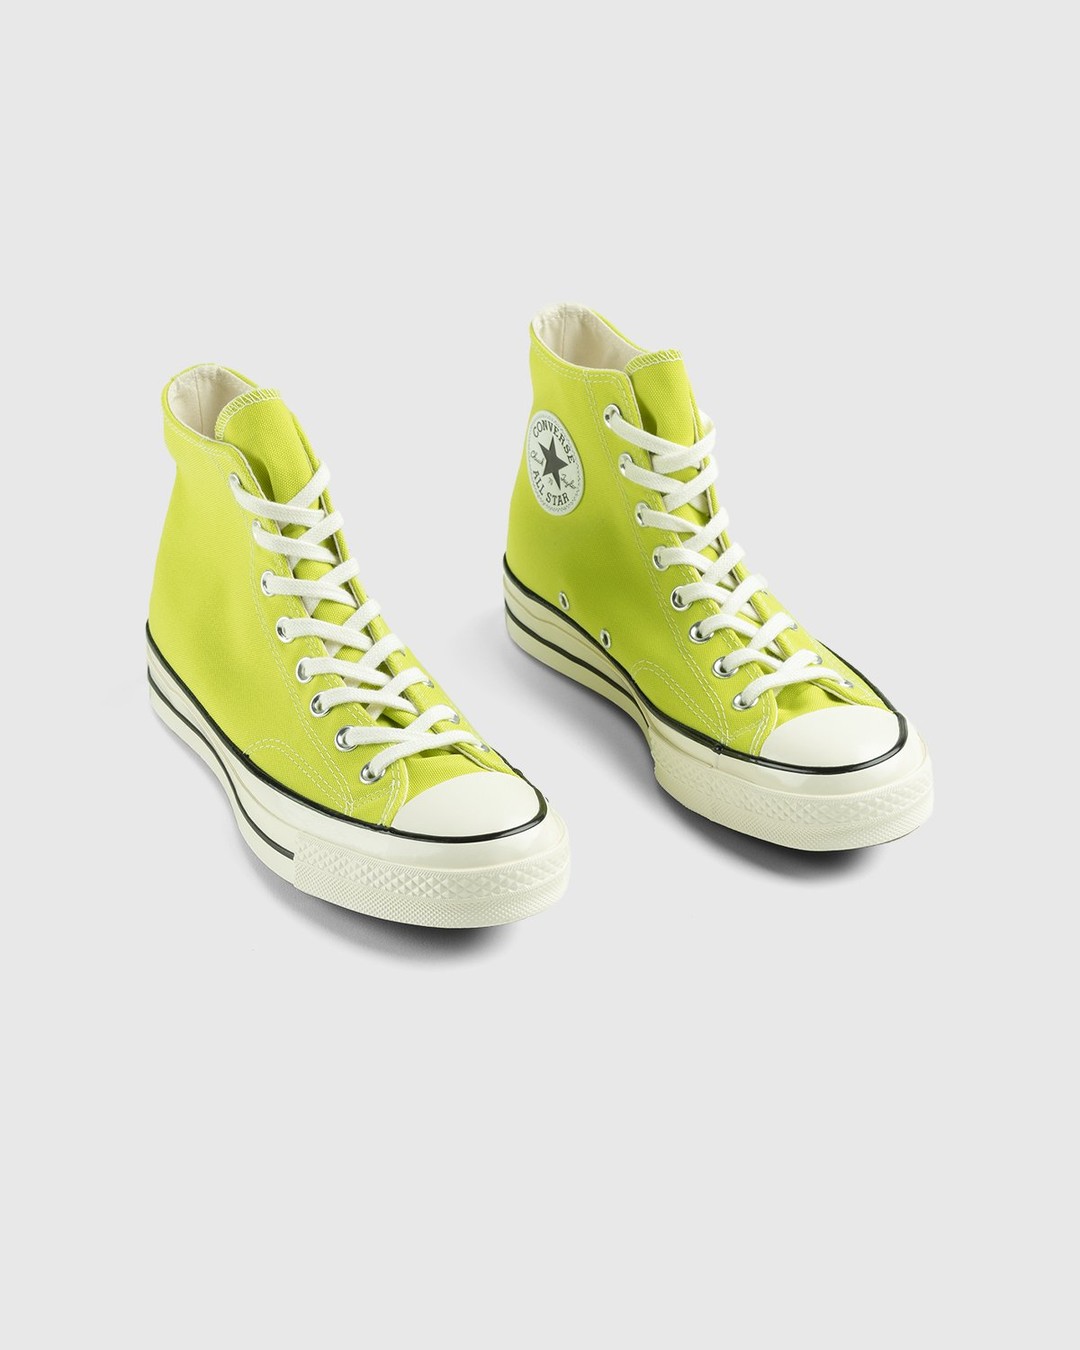 Converse – Chuck 70 Lime Twist Egret Black - High Top Sneakers - Yellow - Image 3